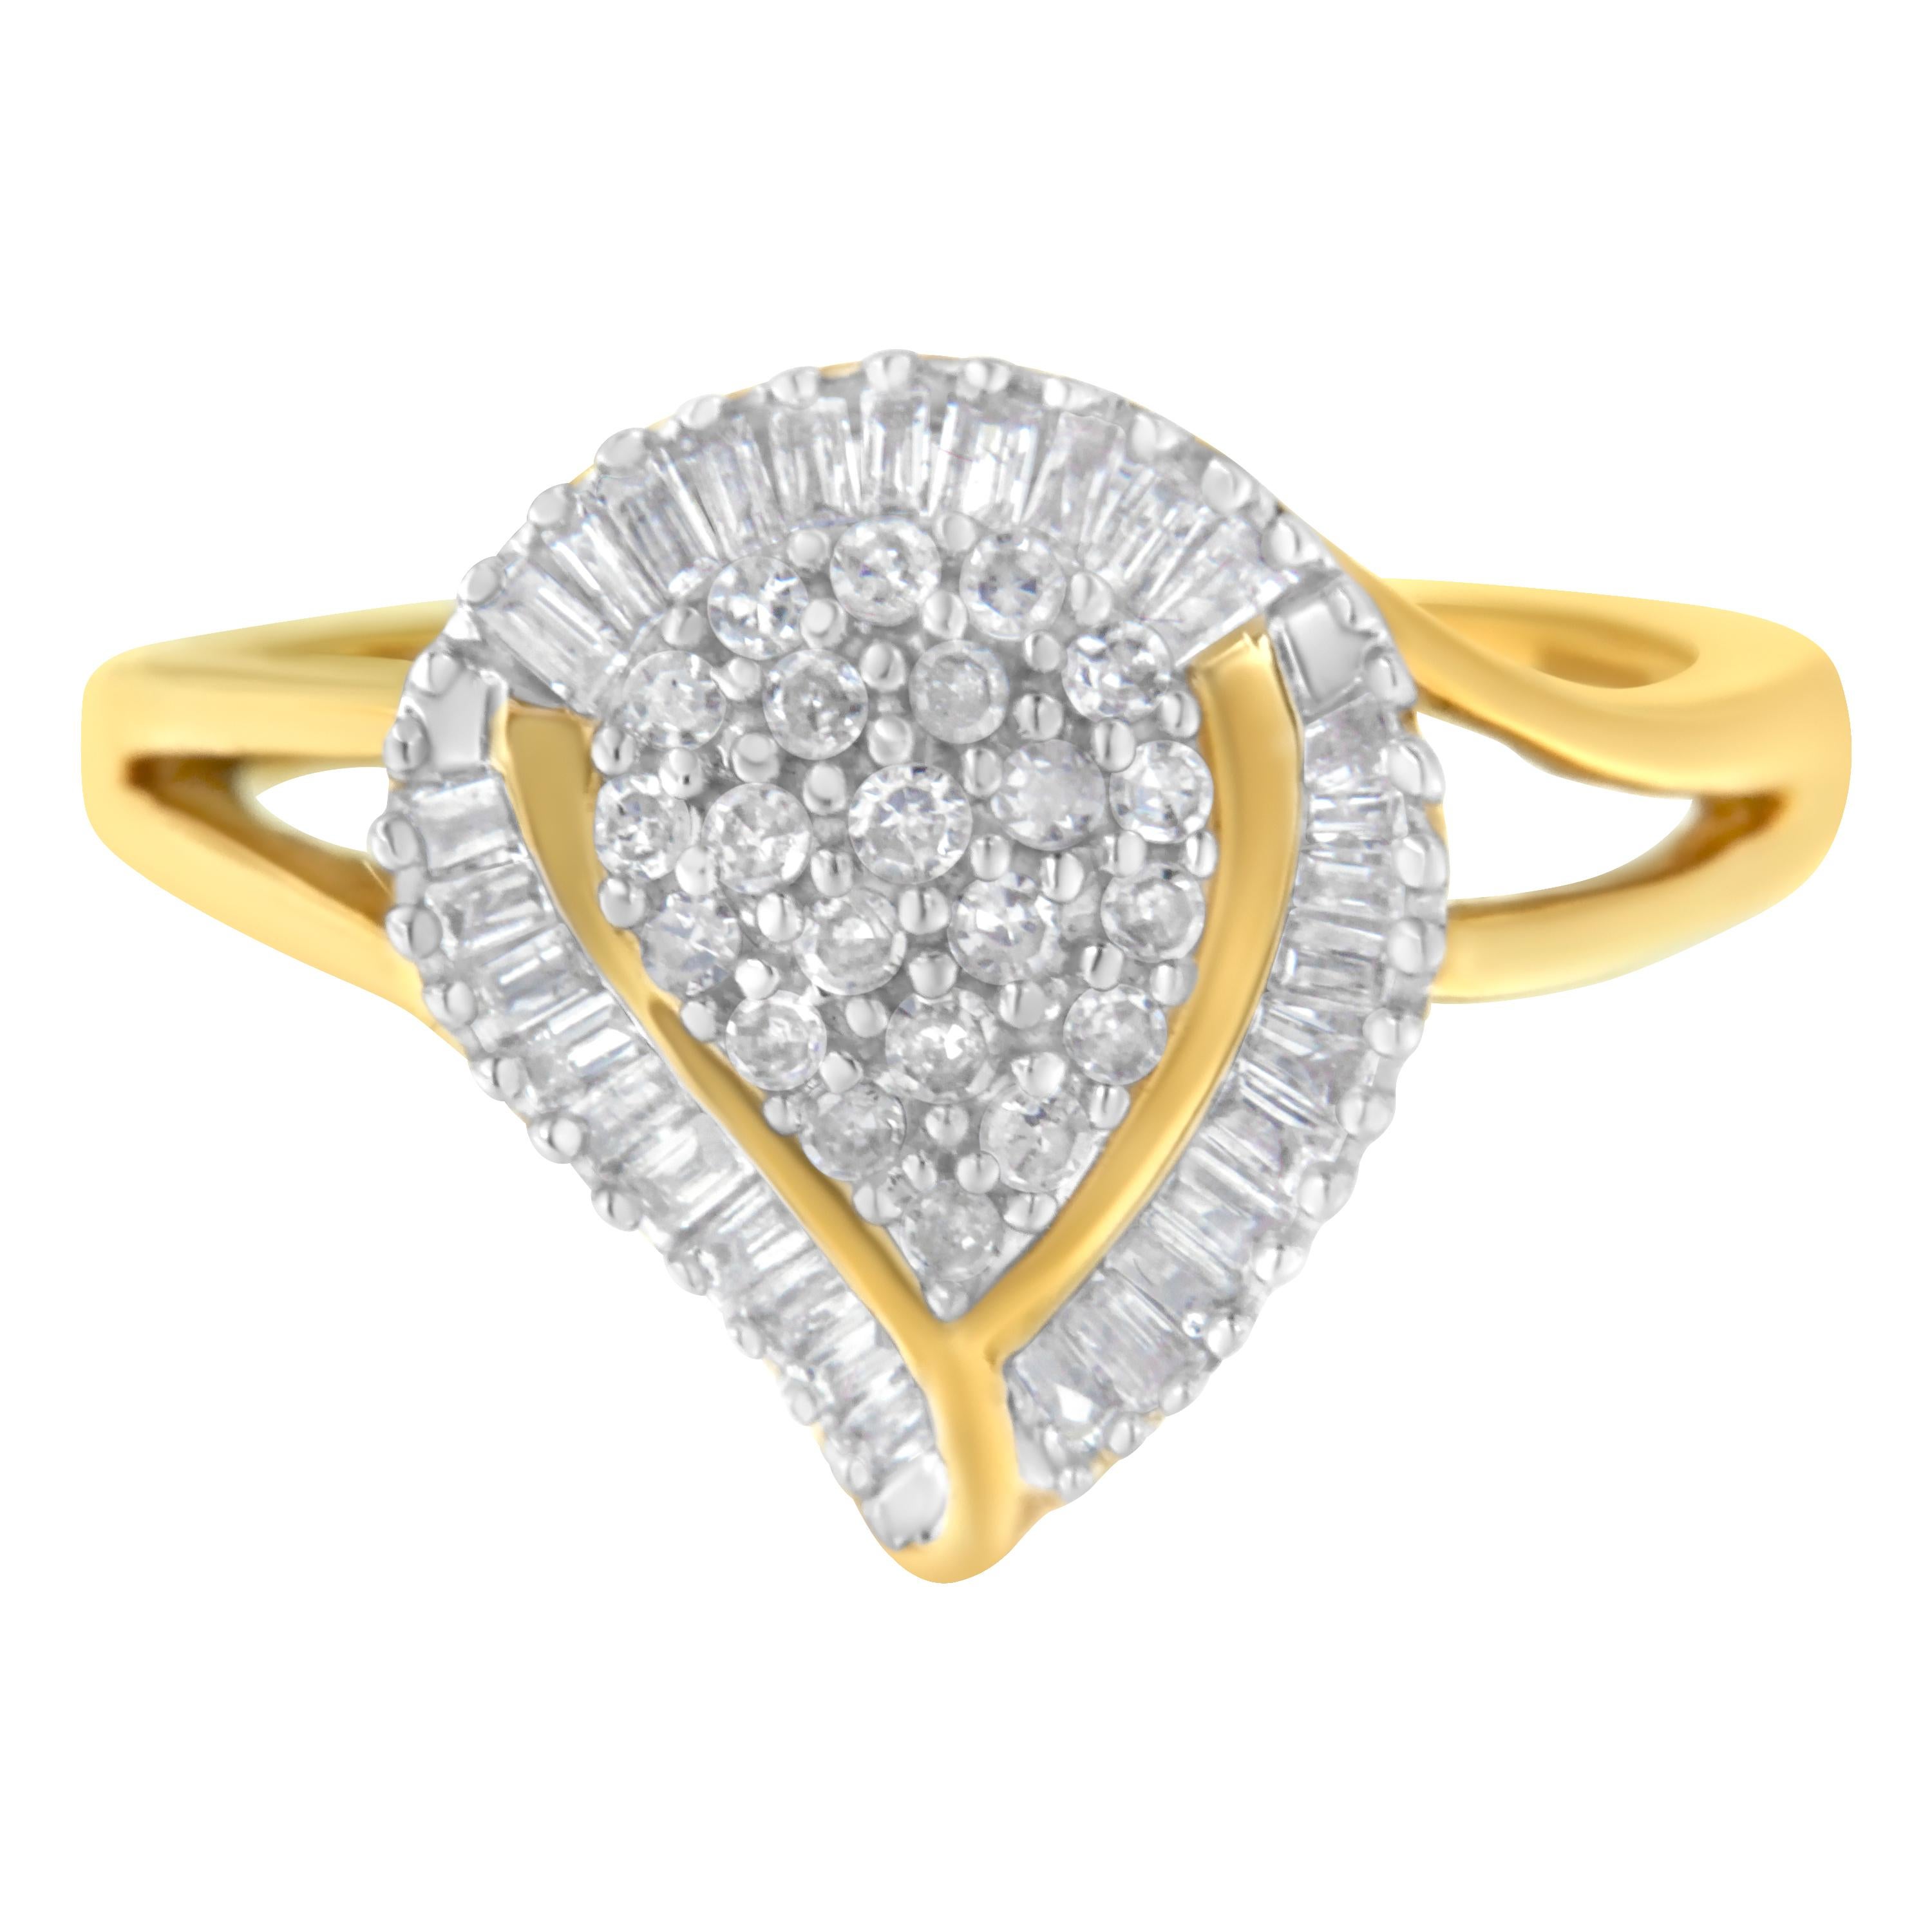 For Sale:  10K Yellow Gold 1/2 Carat Diamond Cluster Ring